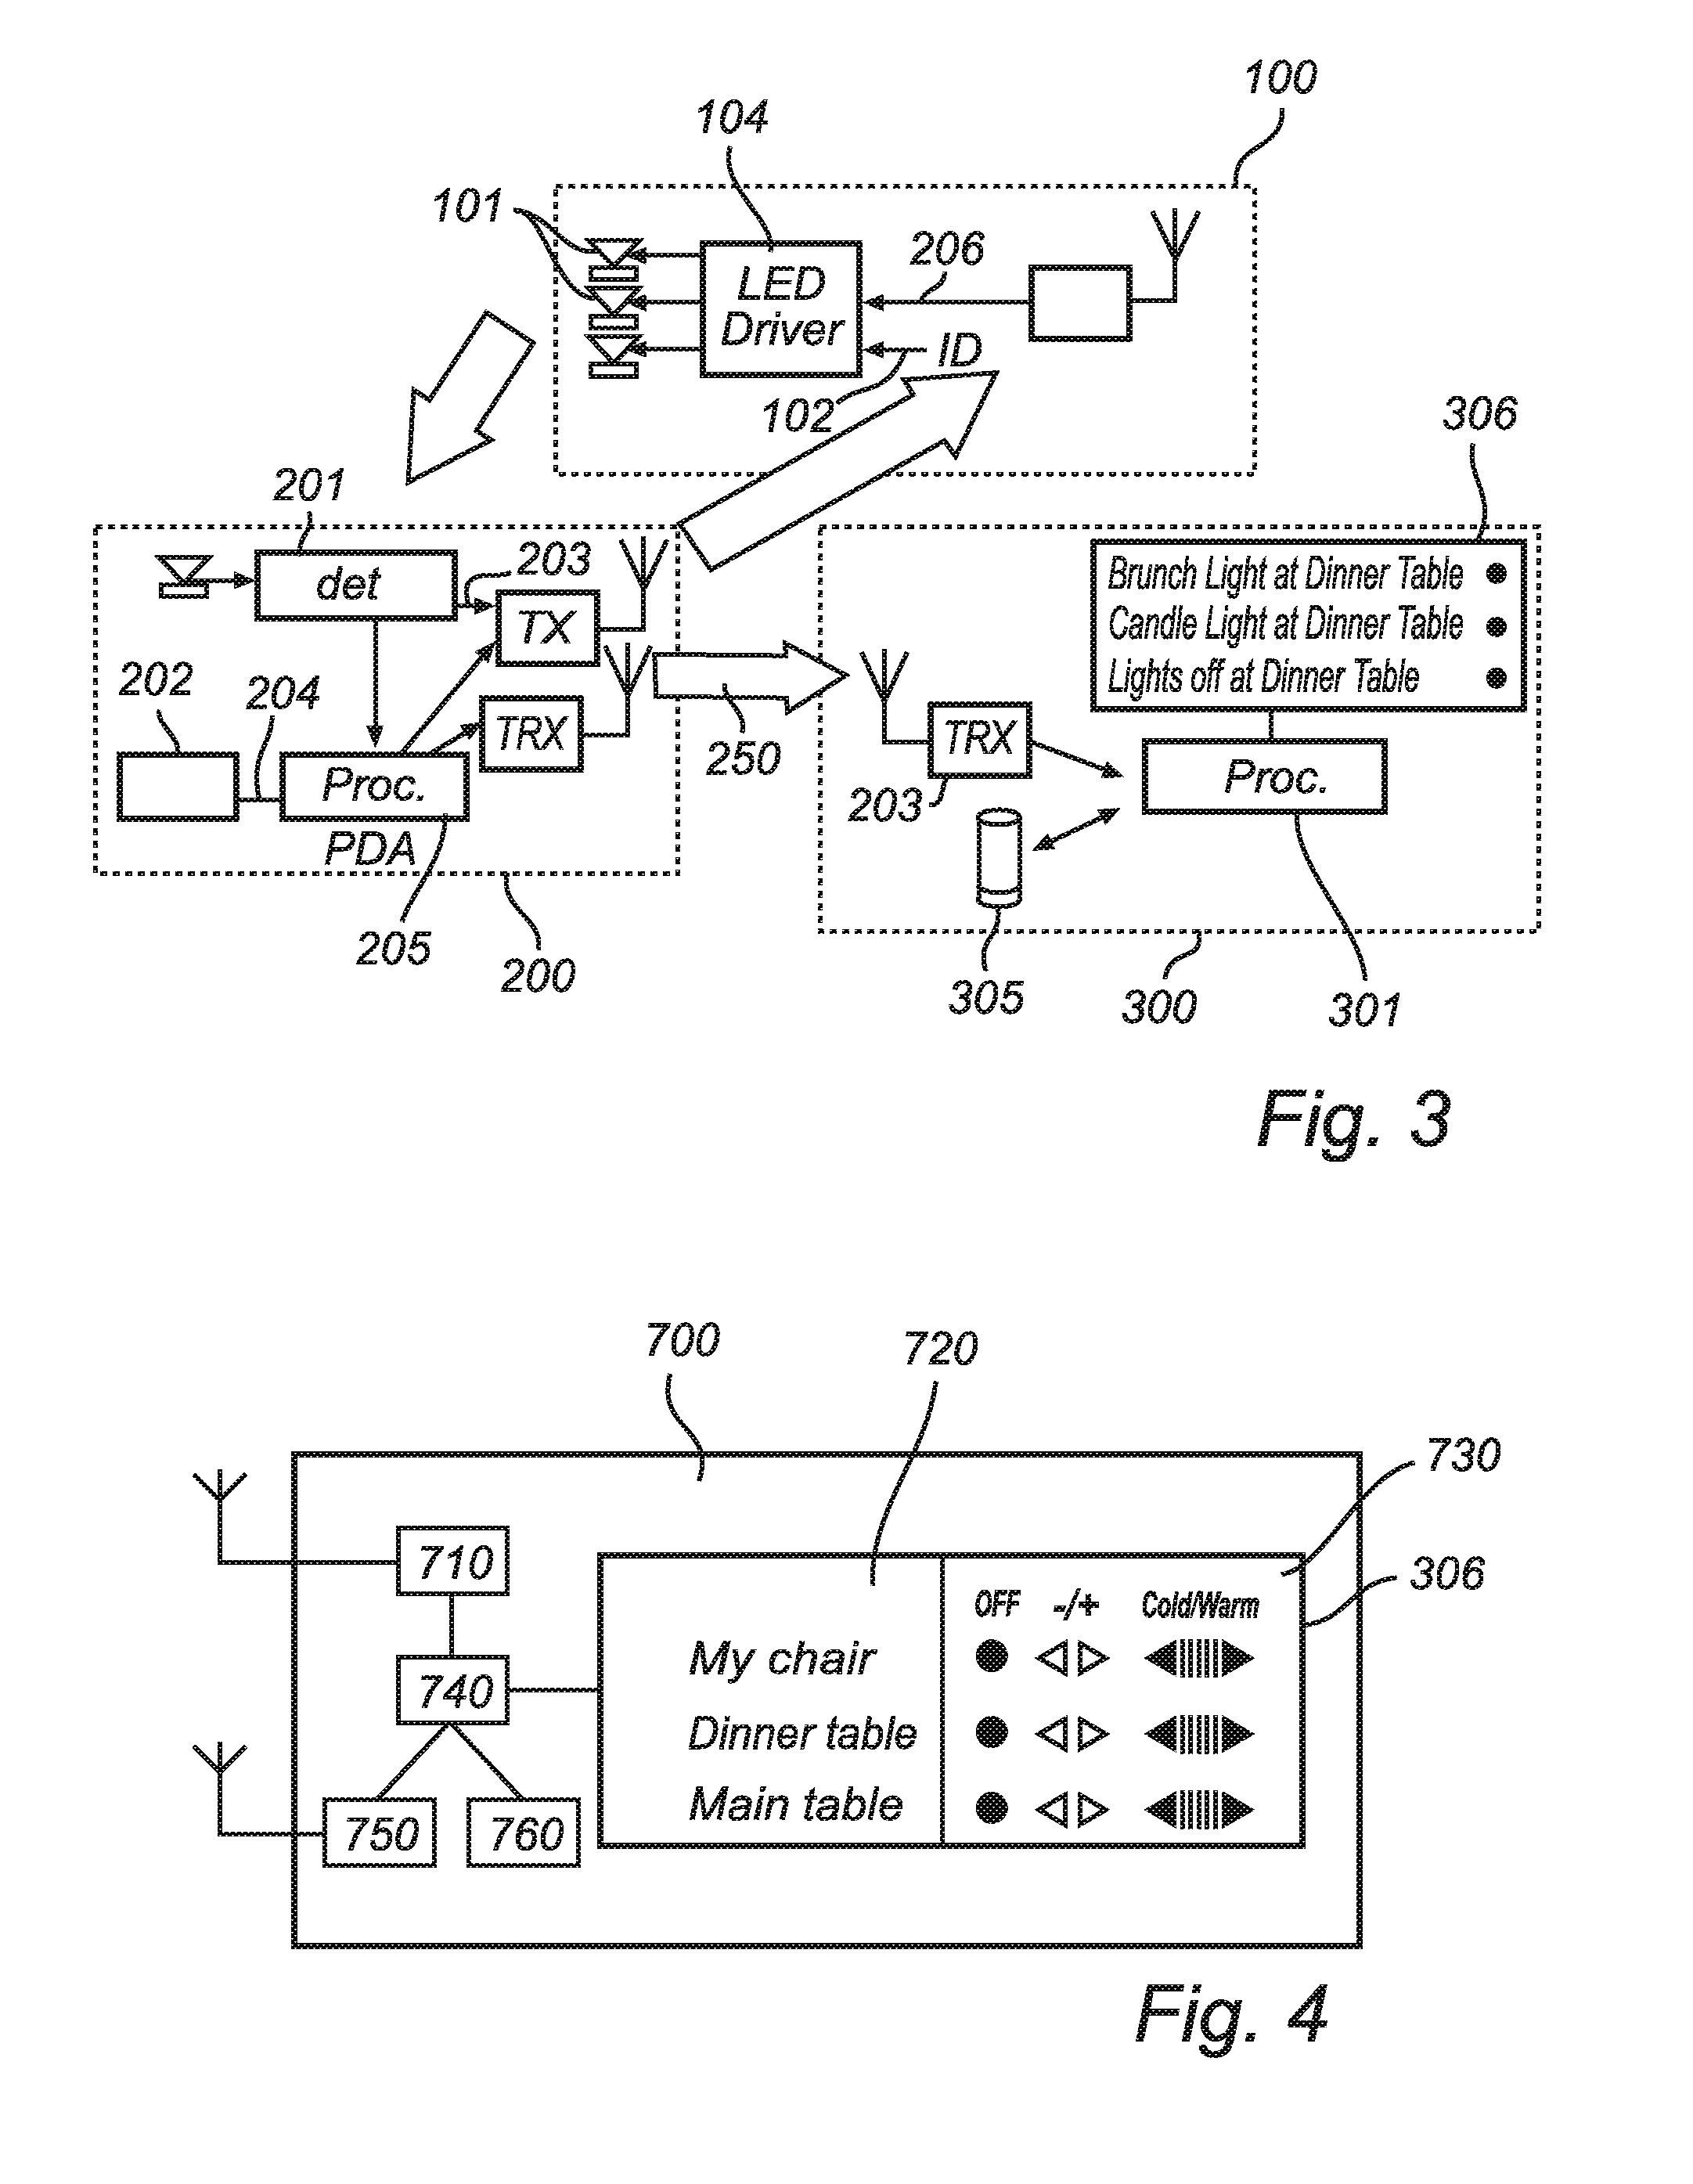 Method and a system for controlling a lighting system